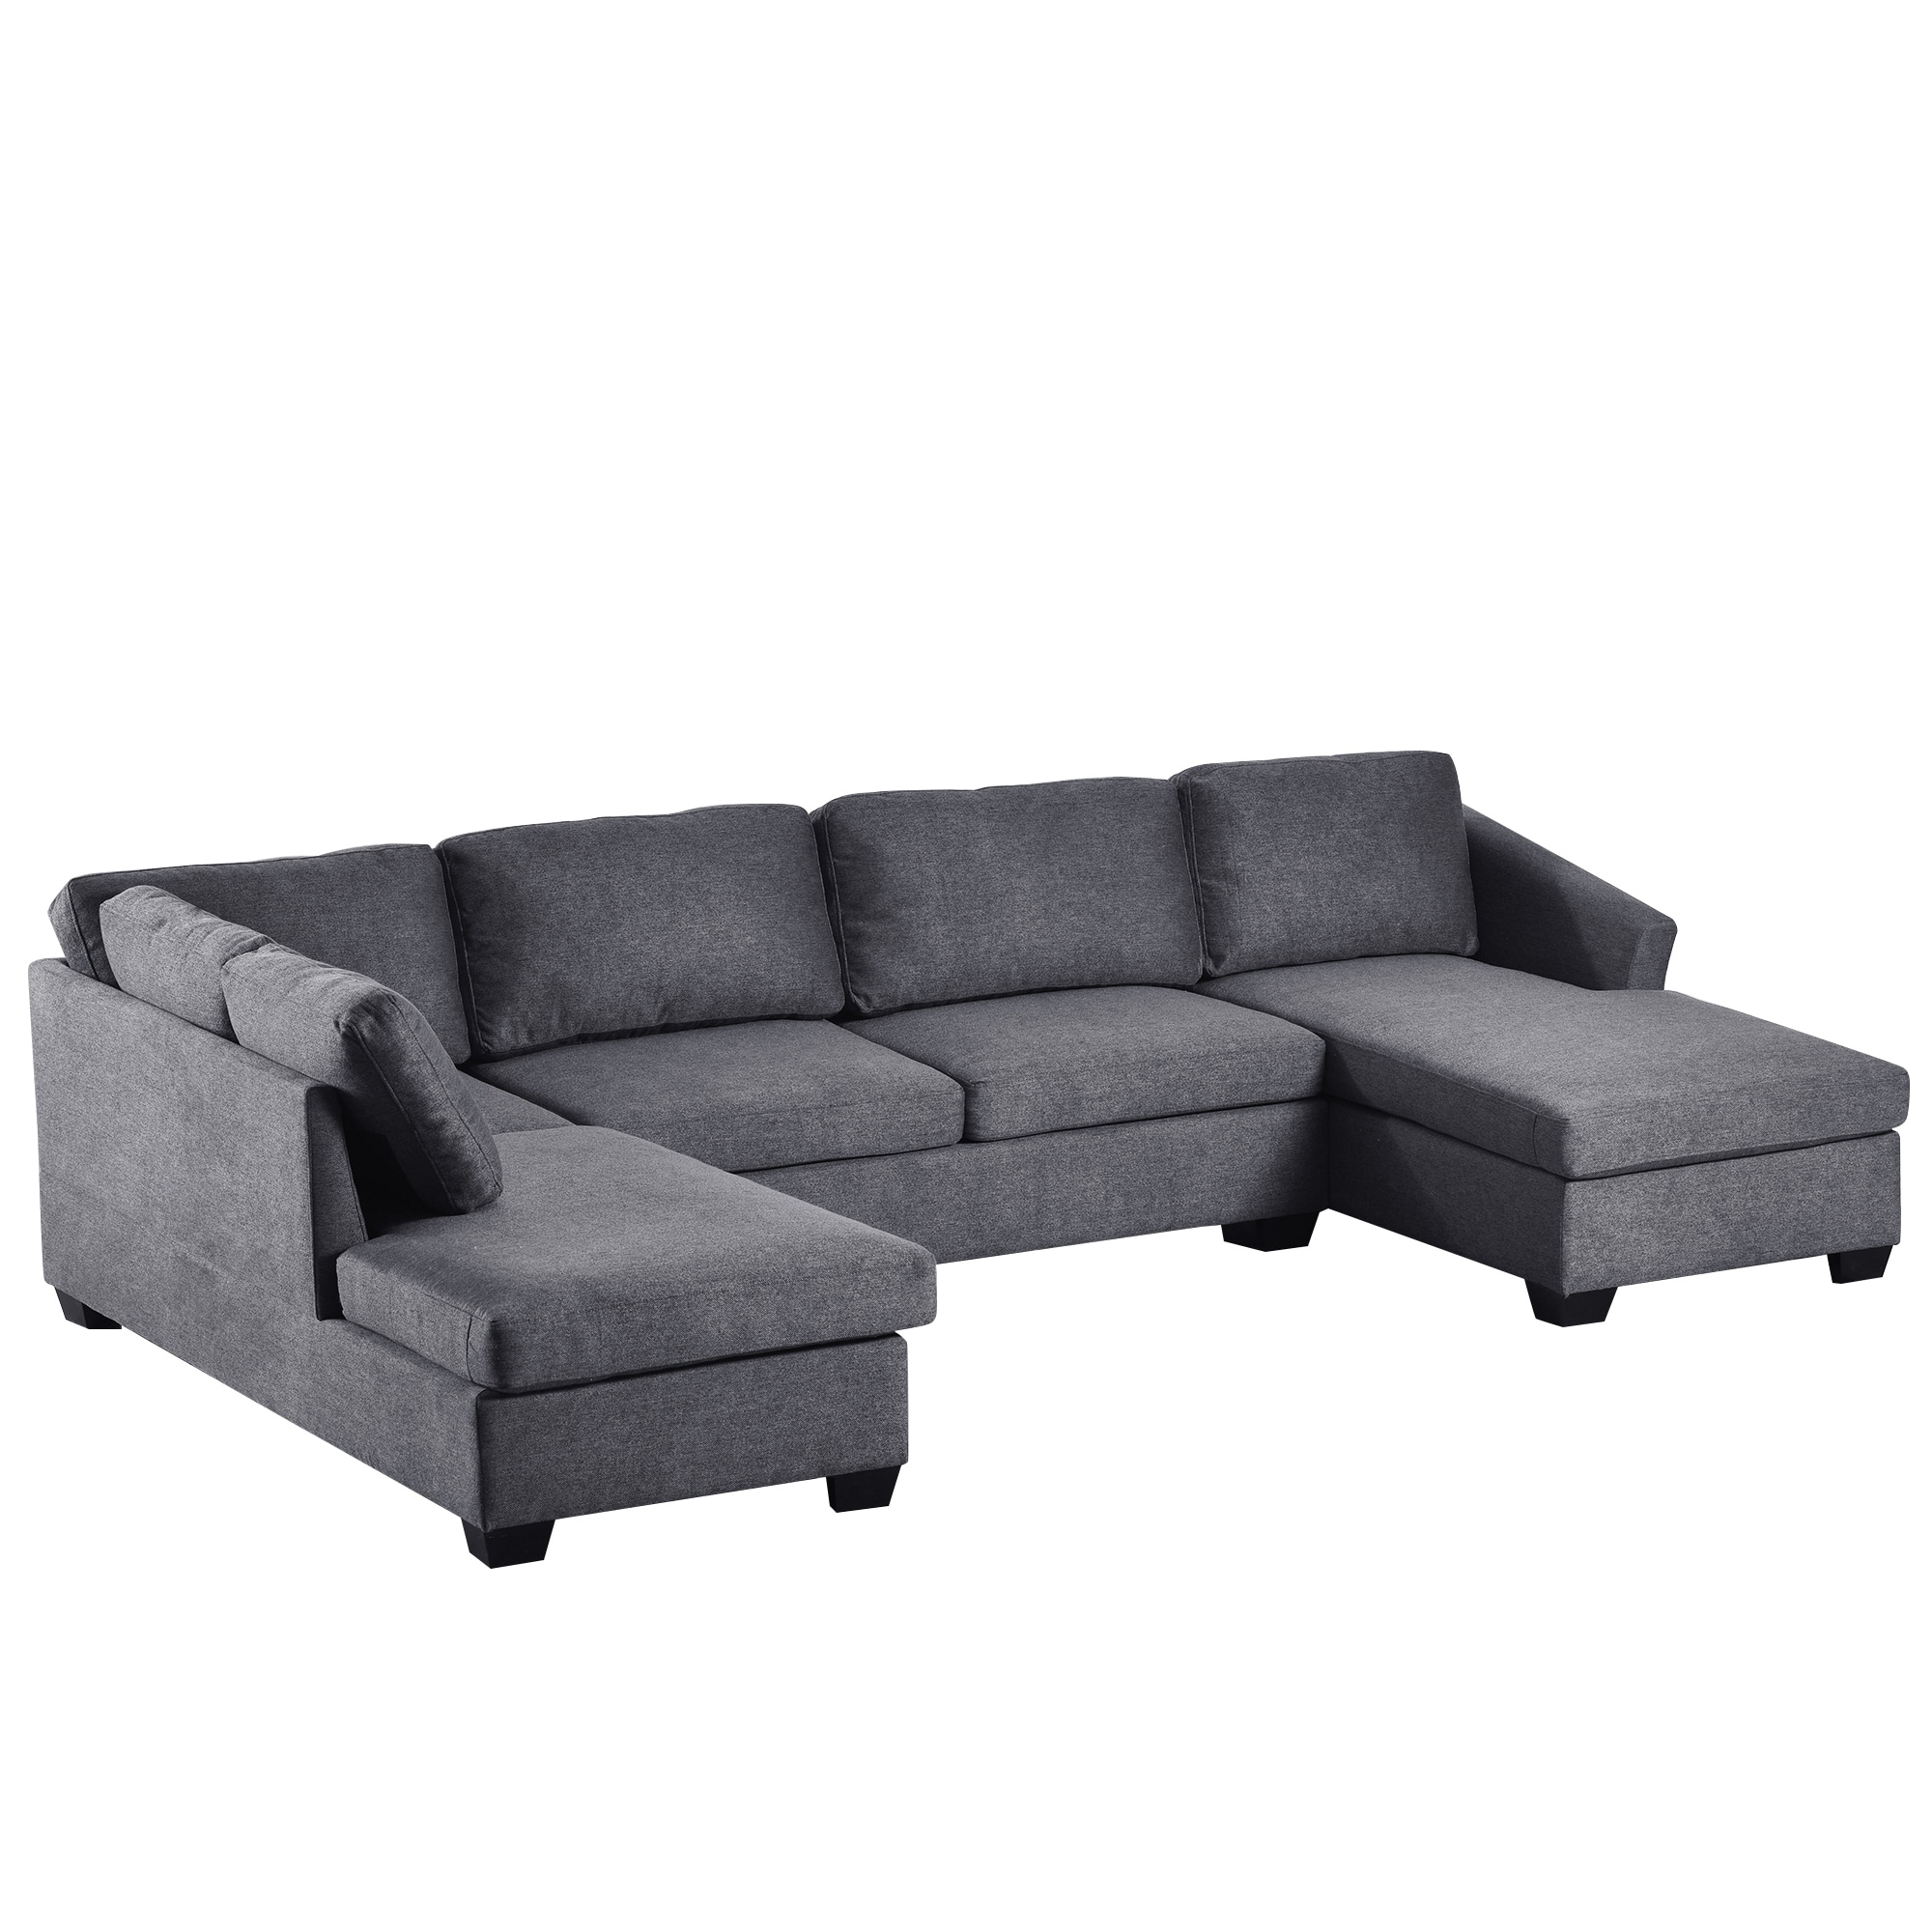 Modern Large U-Shape Sectional Sofa, Wood Frame and Birch Wood Legs, Double Extra Wide Chaise Lounge Couch